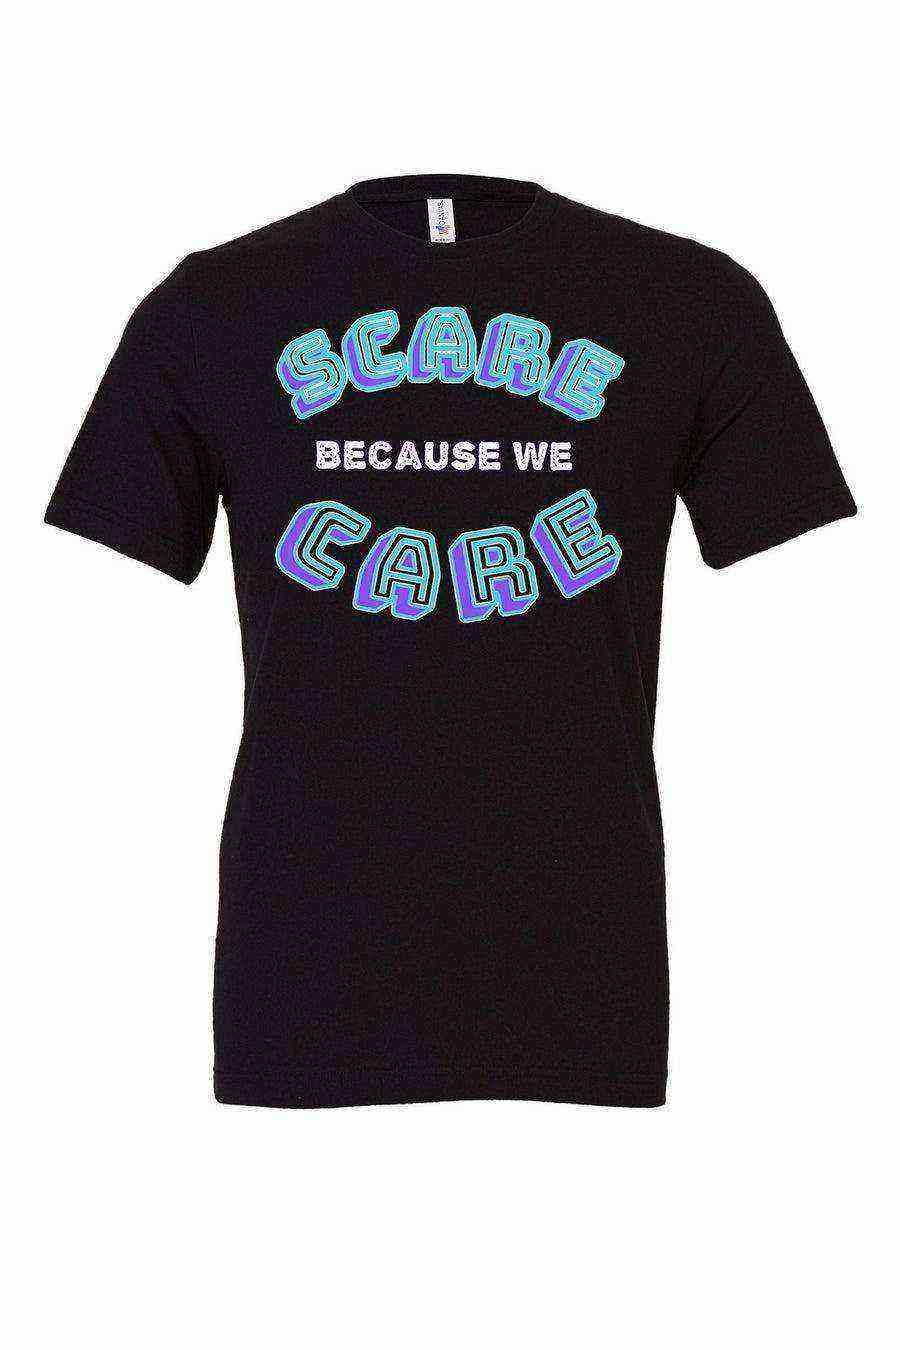 Youth | We Scare Because We Care Monsters Inc Shirt - Dylan's Tees